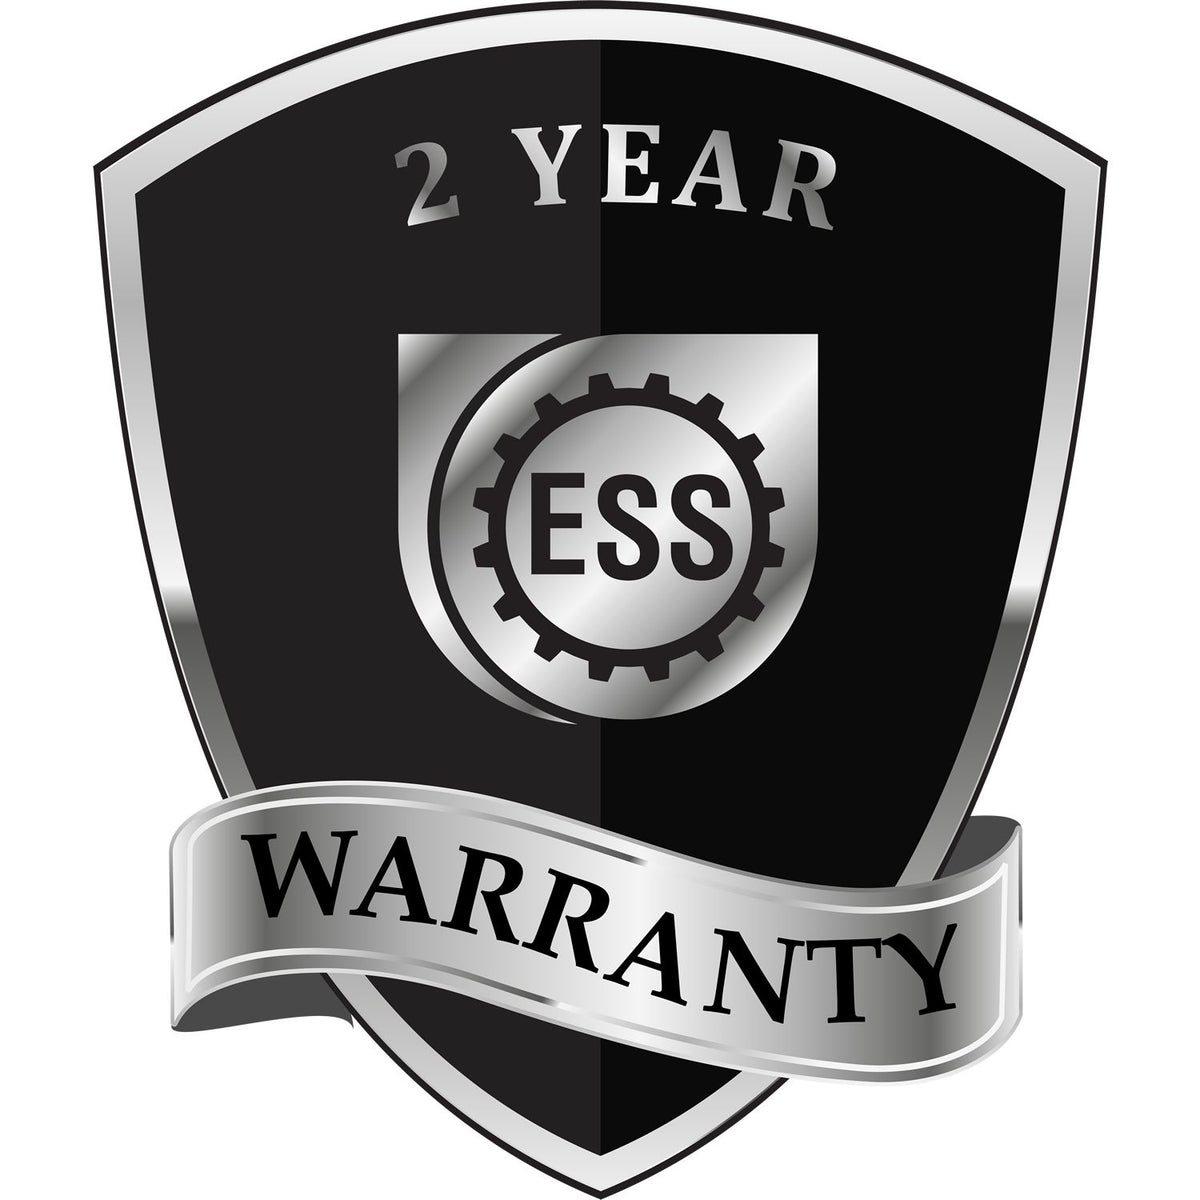 A badge or emblem showing a warranty icon for the Heavy Duty Cast Iron Indiana Architect Embosser